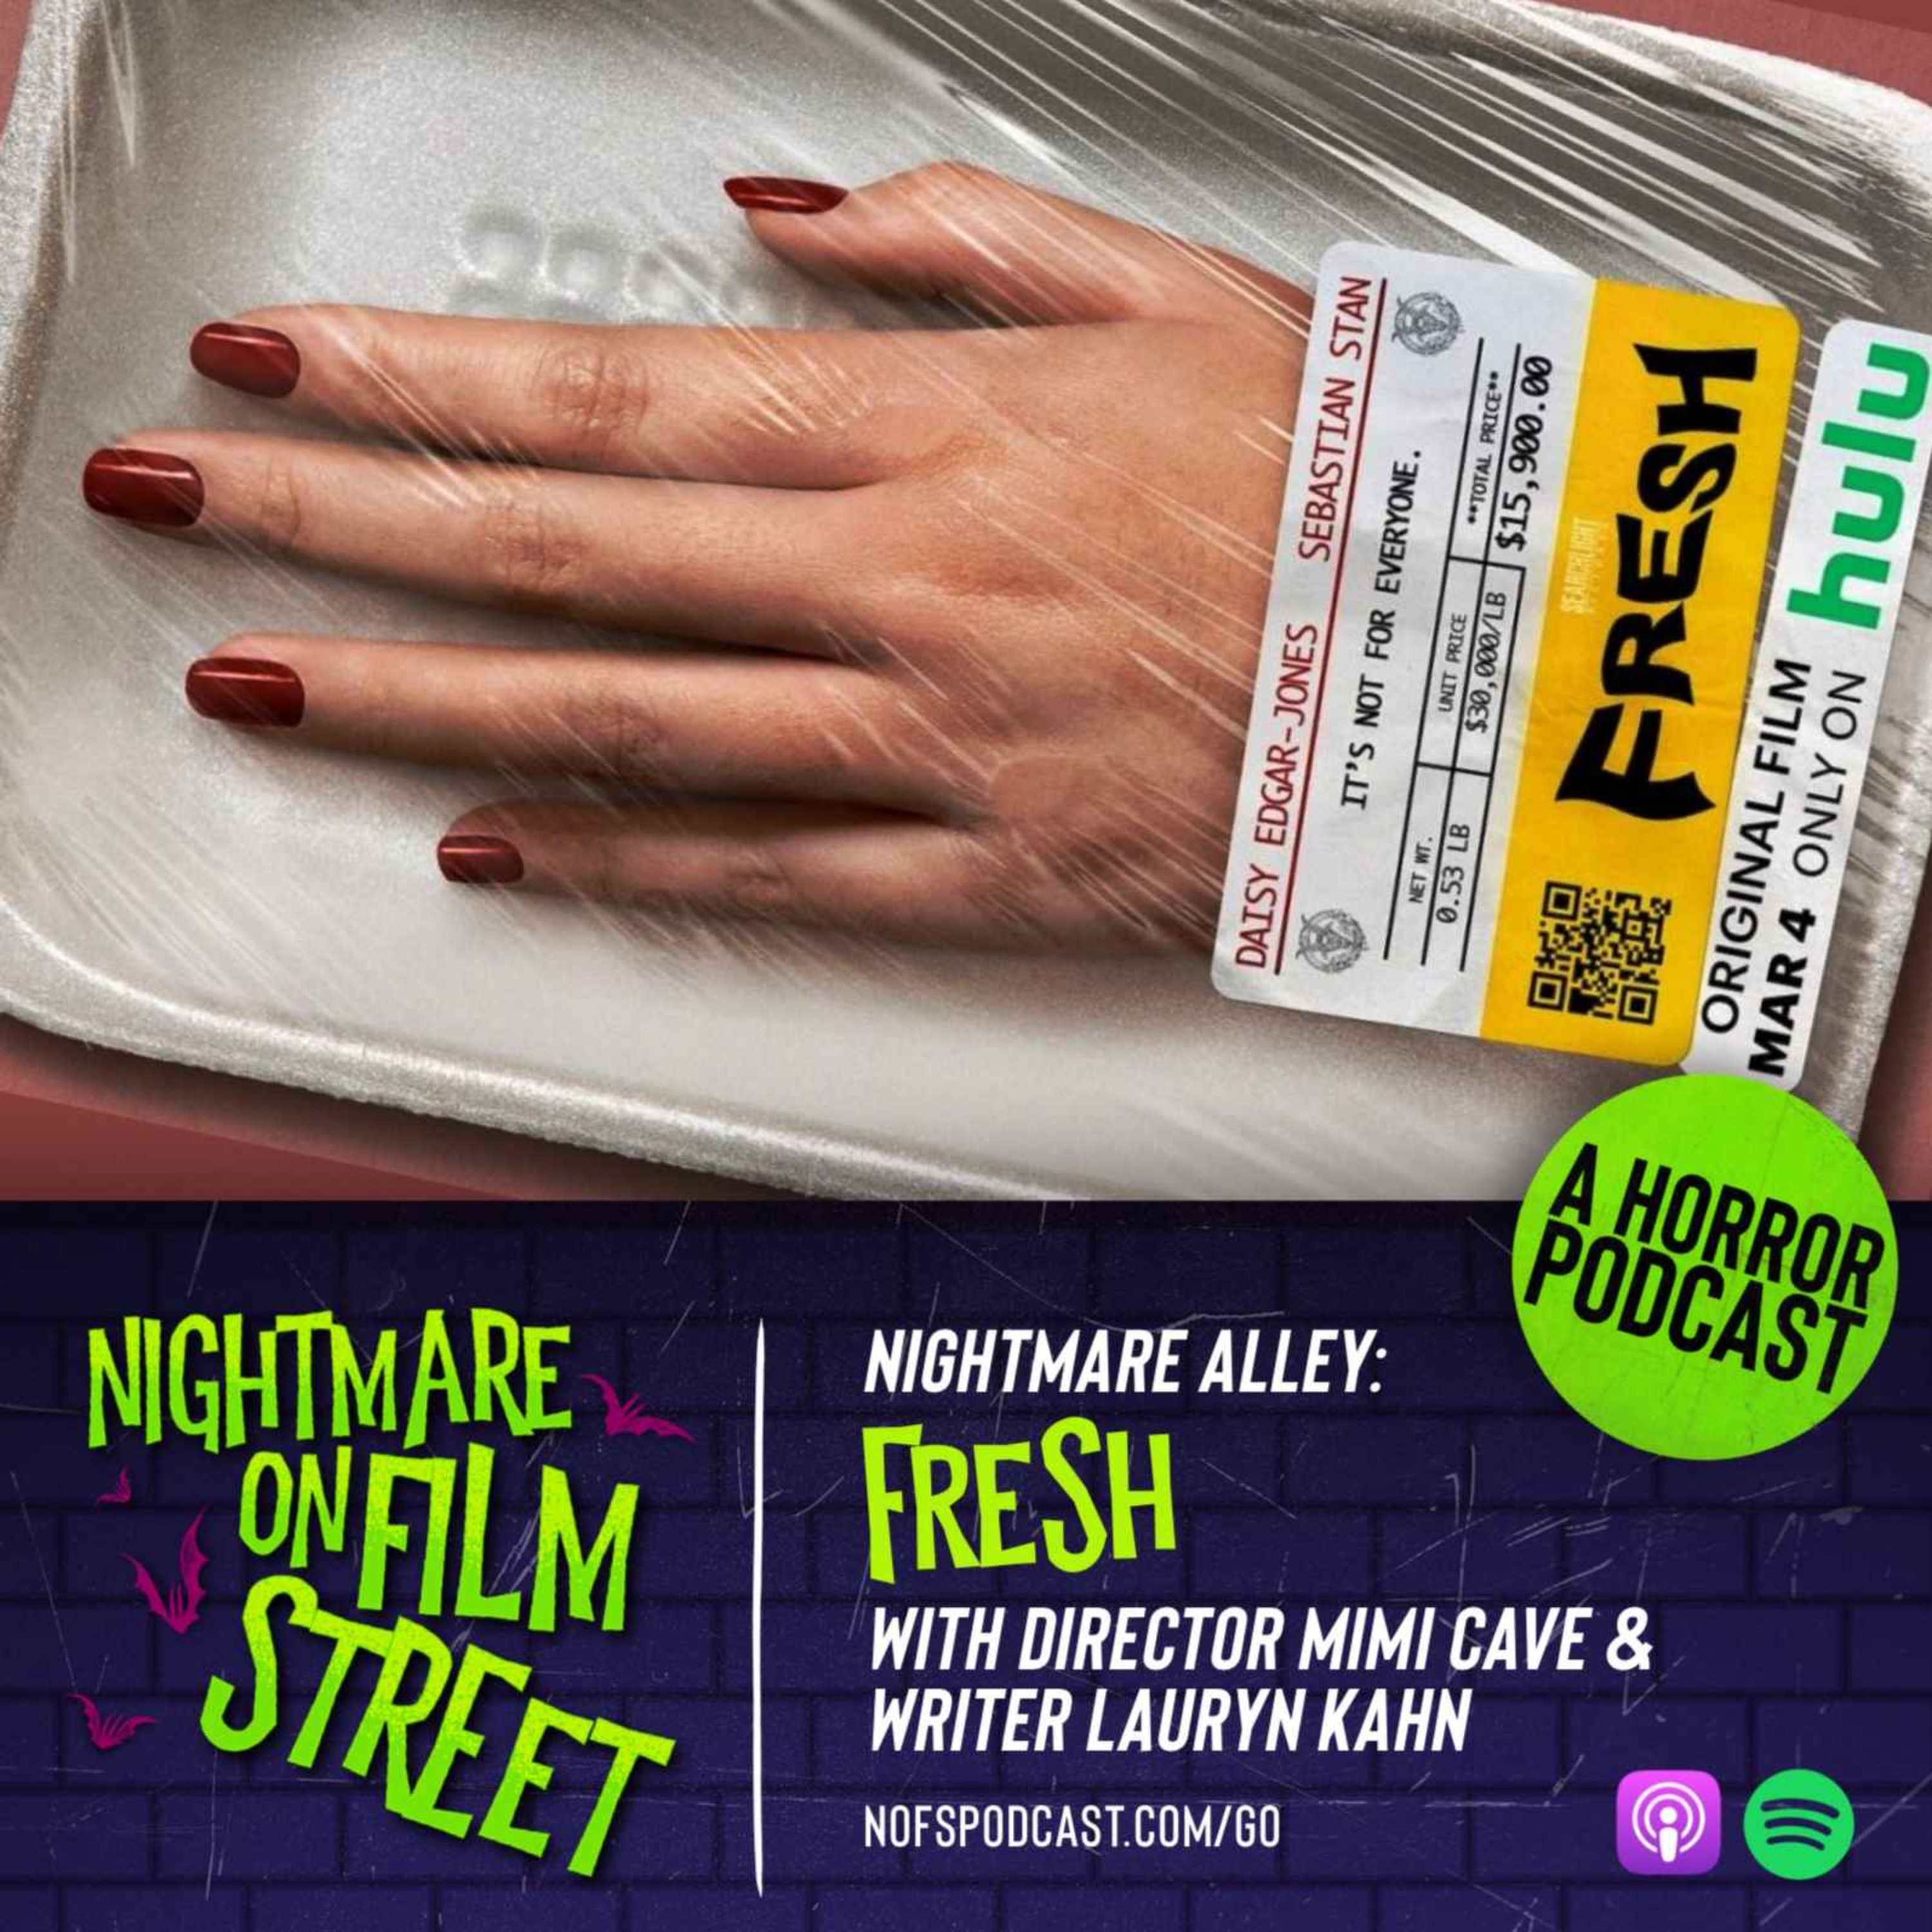 Nightmare Alley: FRESH Interview with Director Mimi Cave and Writer Lauryn Kahn